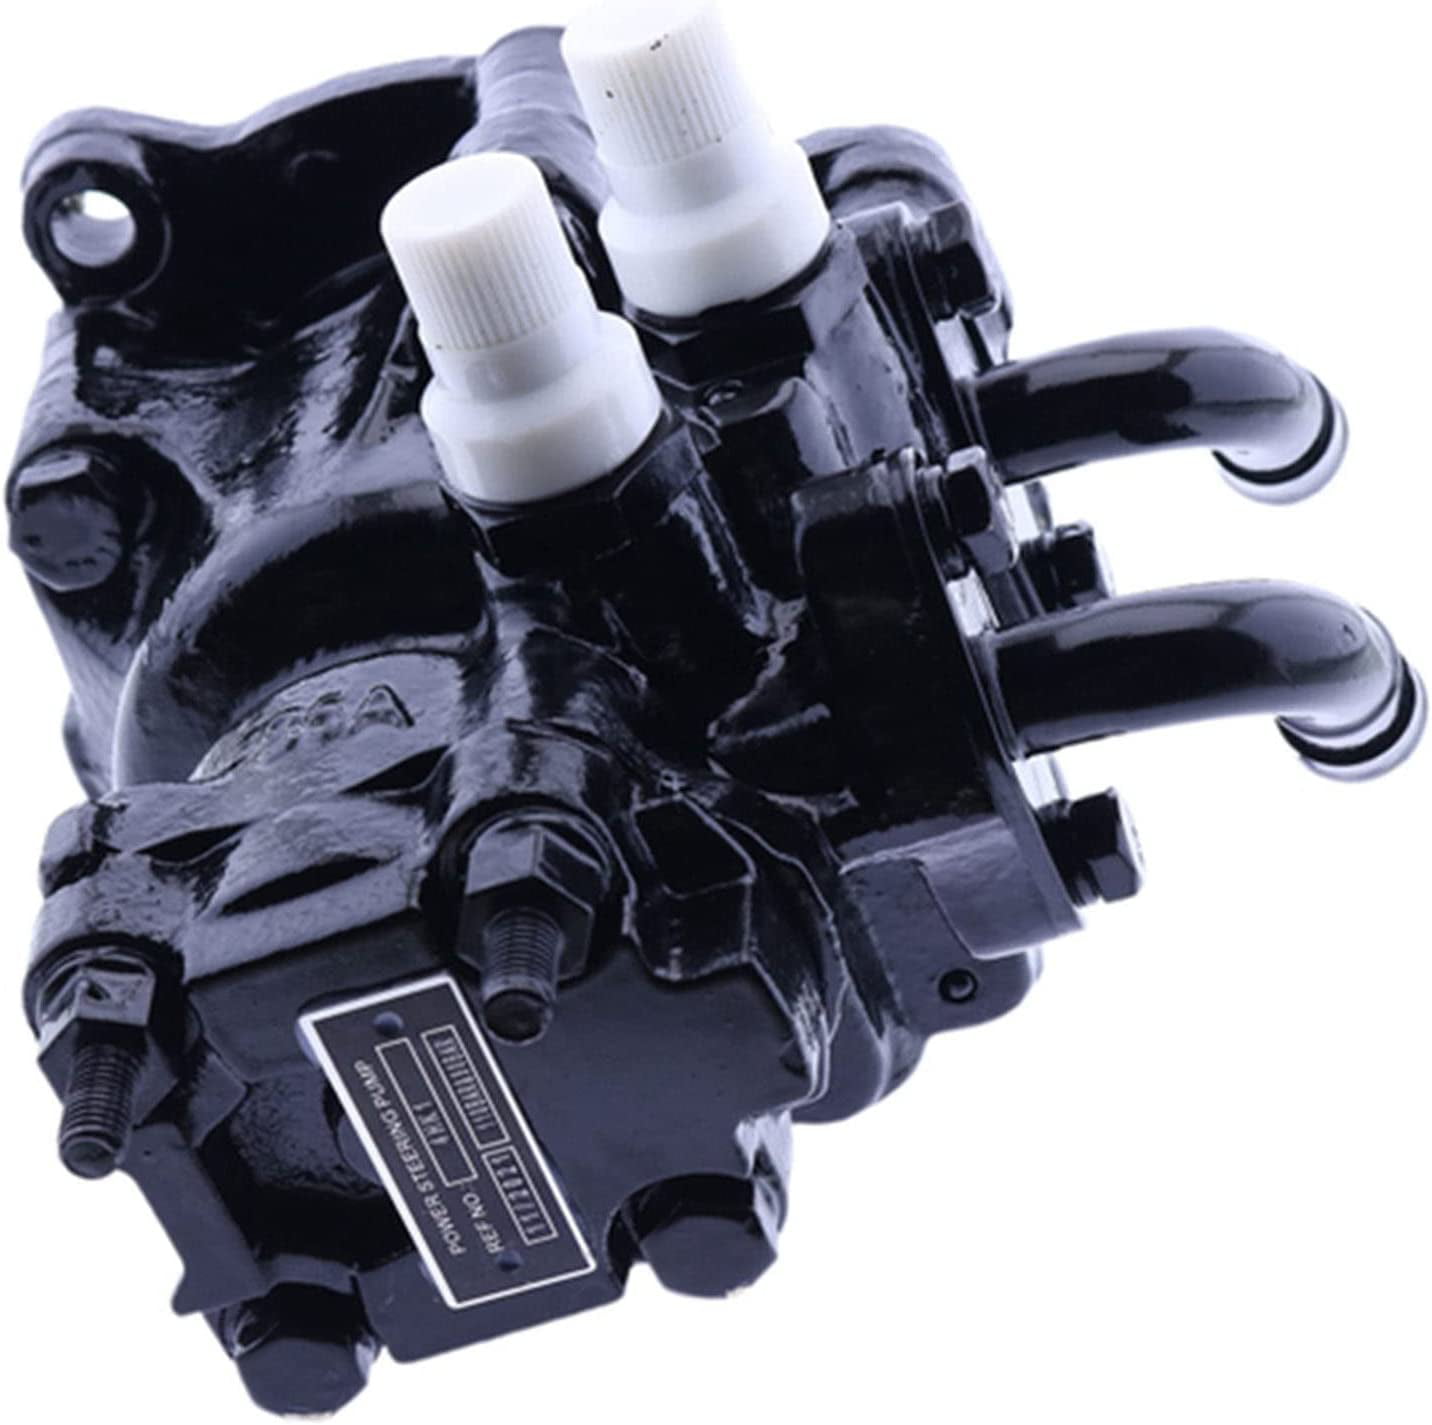 Seapple Power Steering Pump Assy 8-97258461-0 Compatible with Isuzu 4HE1  4HG1 4HG1T Engine 700P NPR